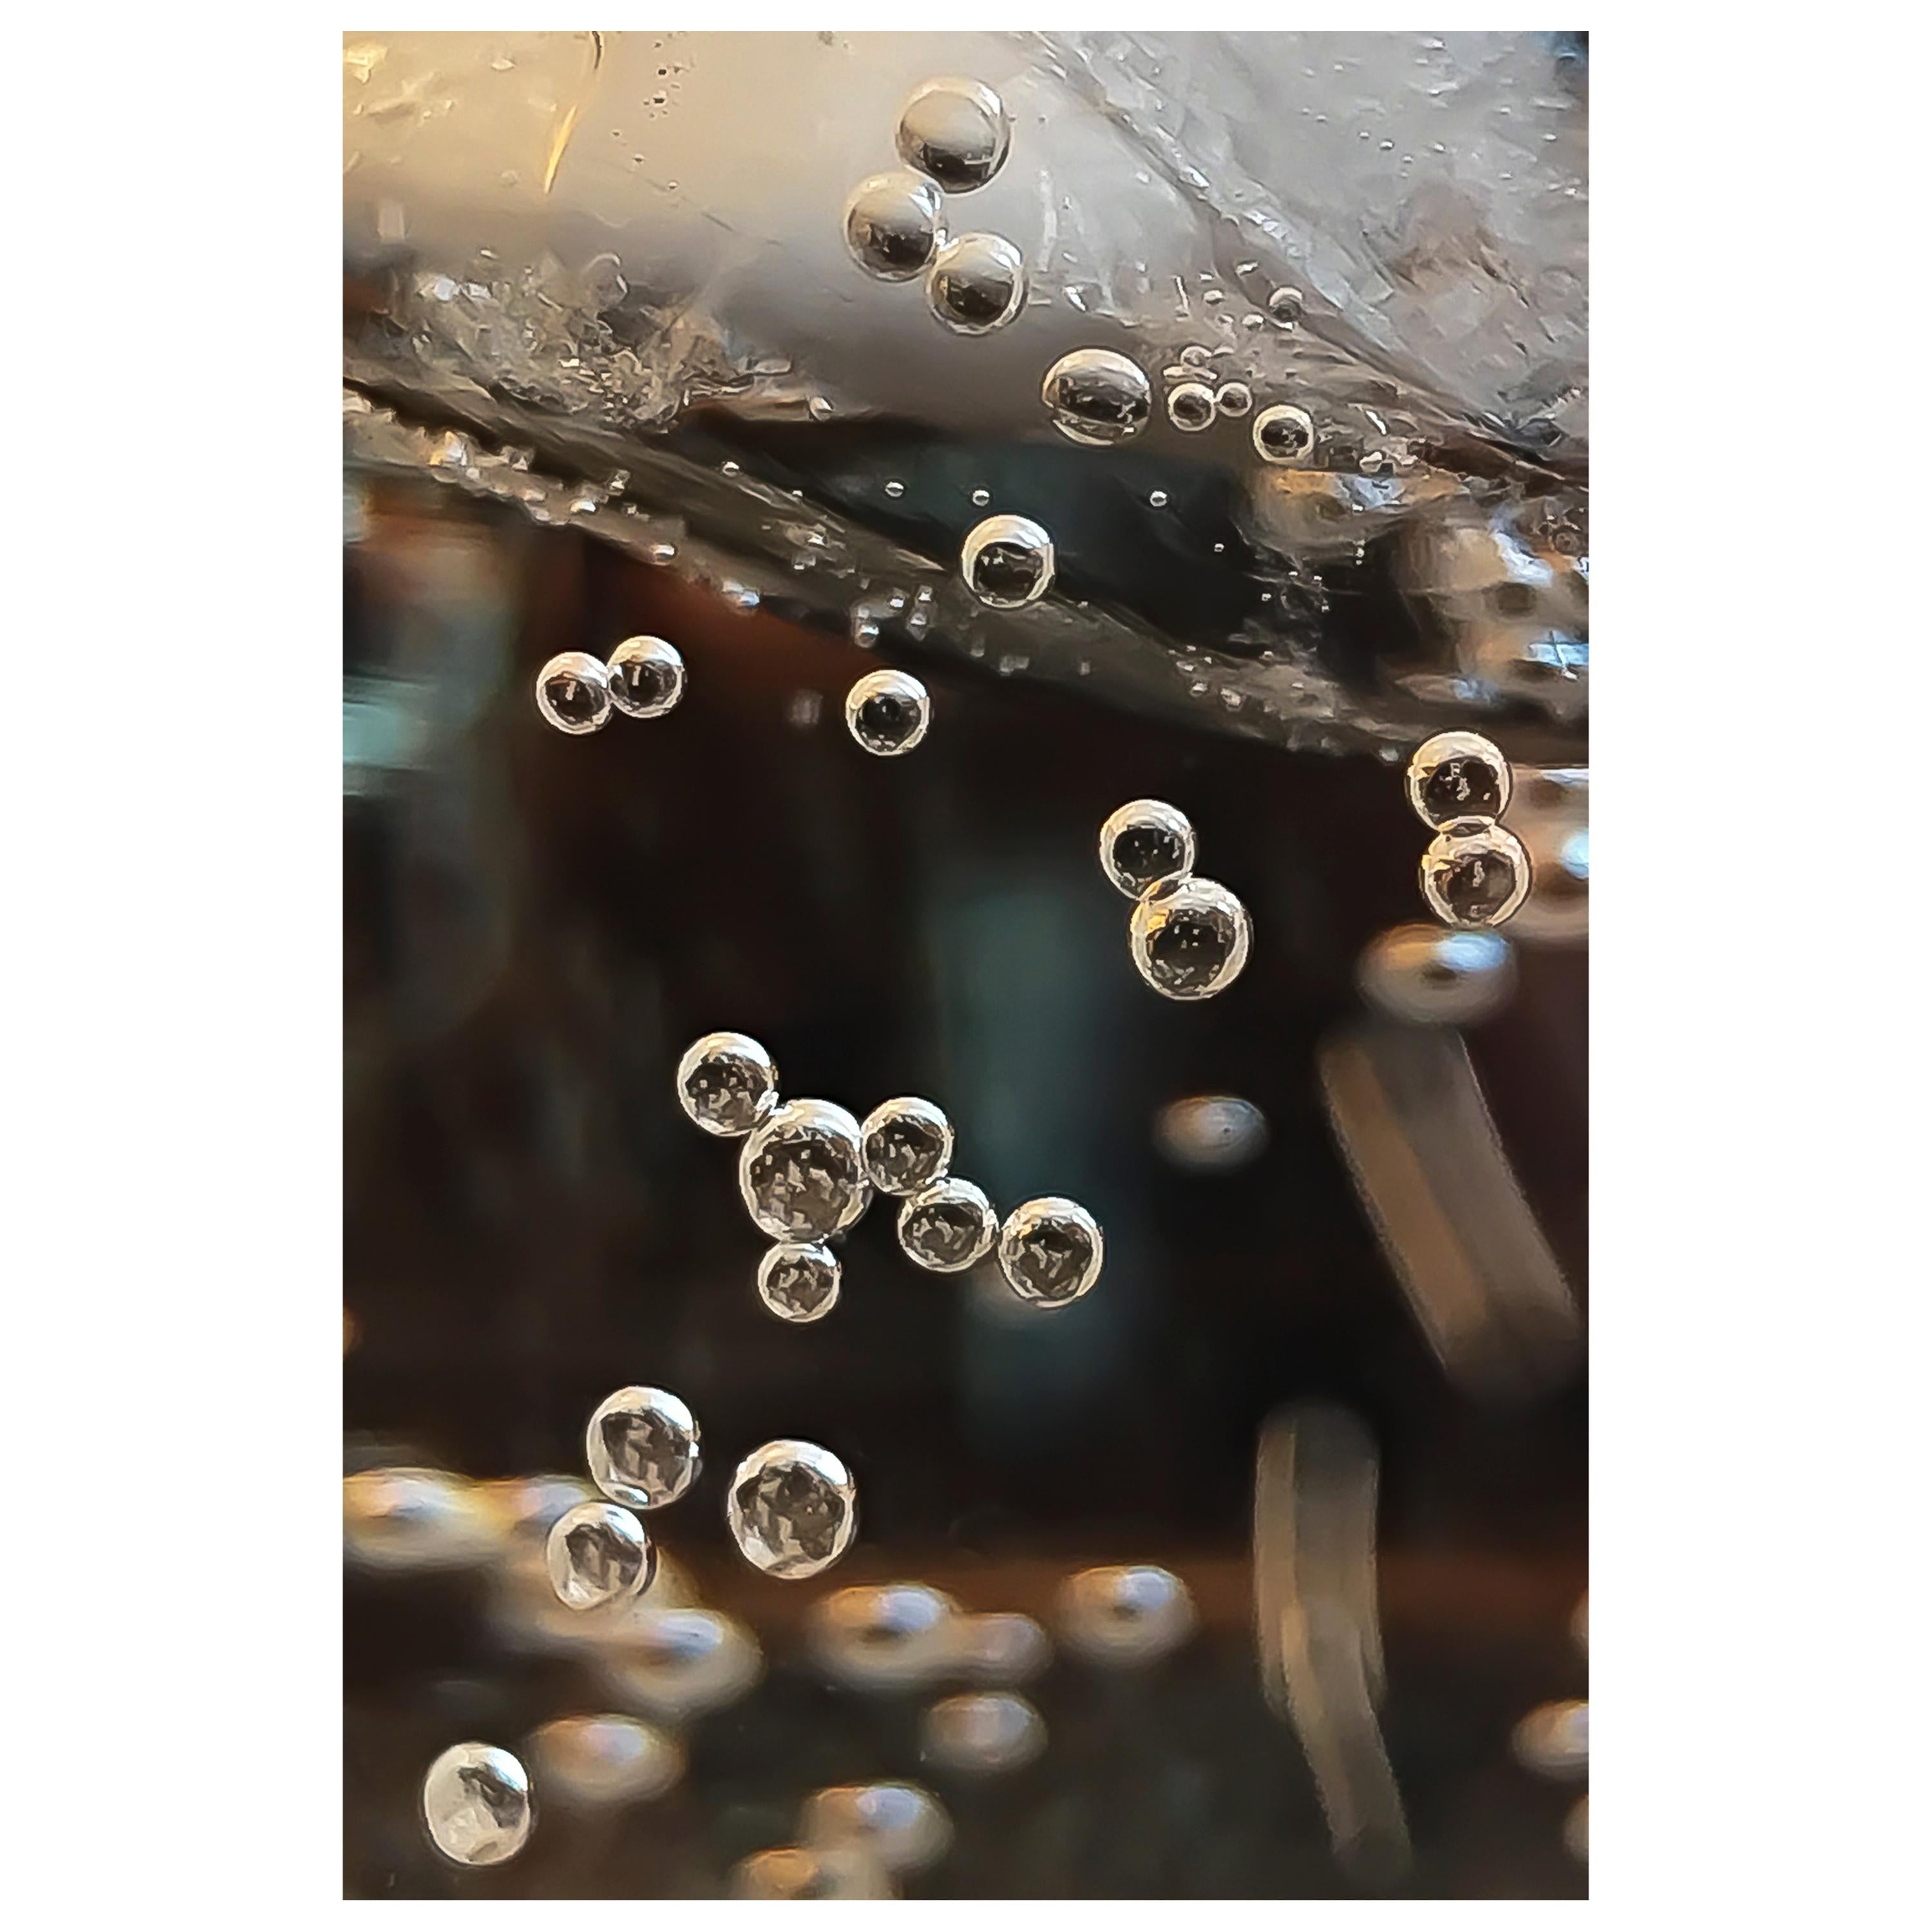 Bubbles Suspended in Ice Digital Photograph Print by Dave Lasker For Sale